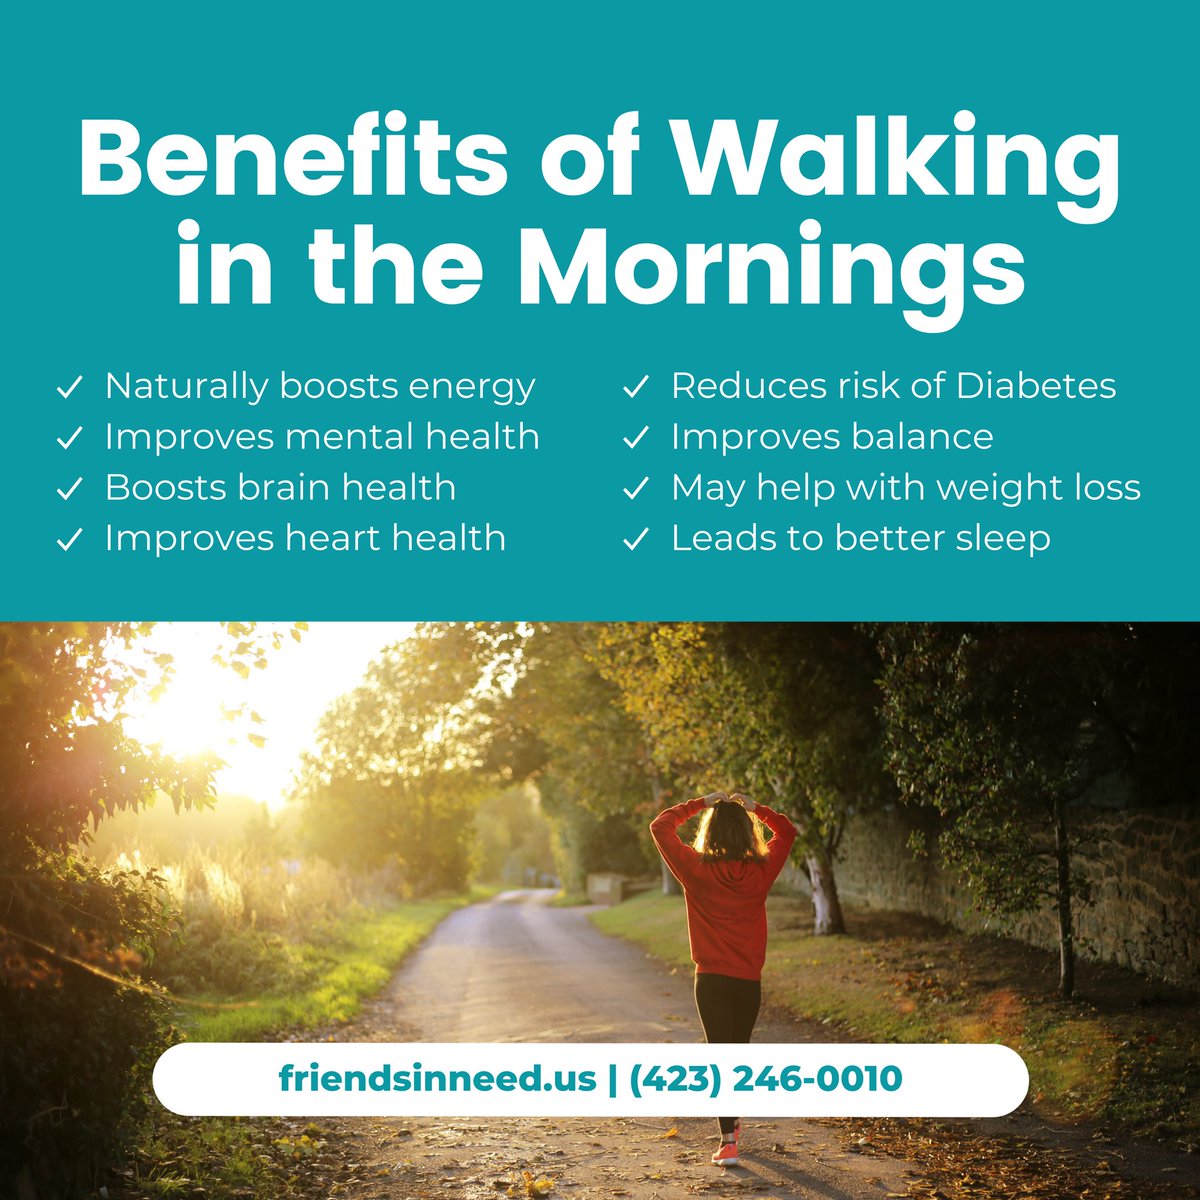 We are loving these crisp September mornings!🍂 Try walking in the mornings before you start your day for a natural boost of energy⚡️👍🏼
#walking #benefitsofwalking #morningwalk #morningwalks #morningwalksarethebest #morningtime #morningroutine #walkingforhealth #health #kpt #tn